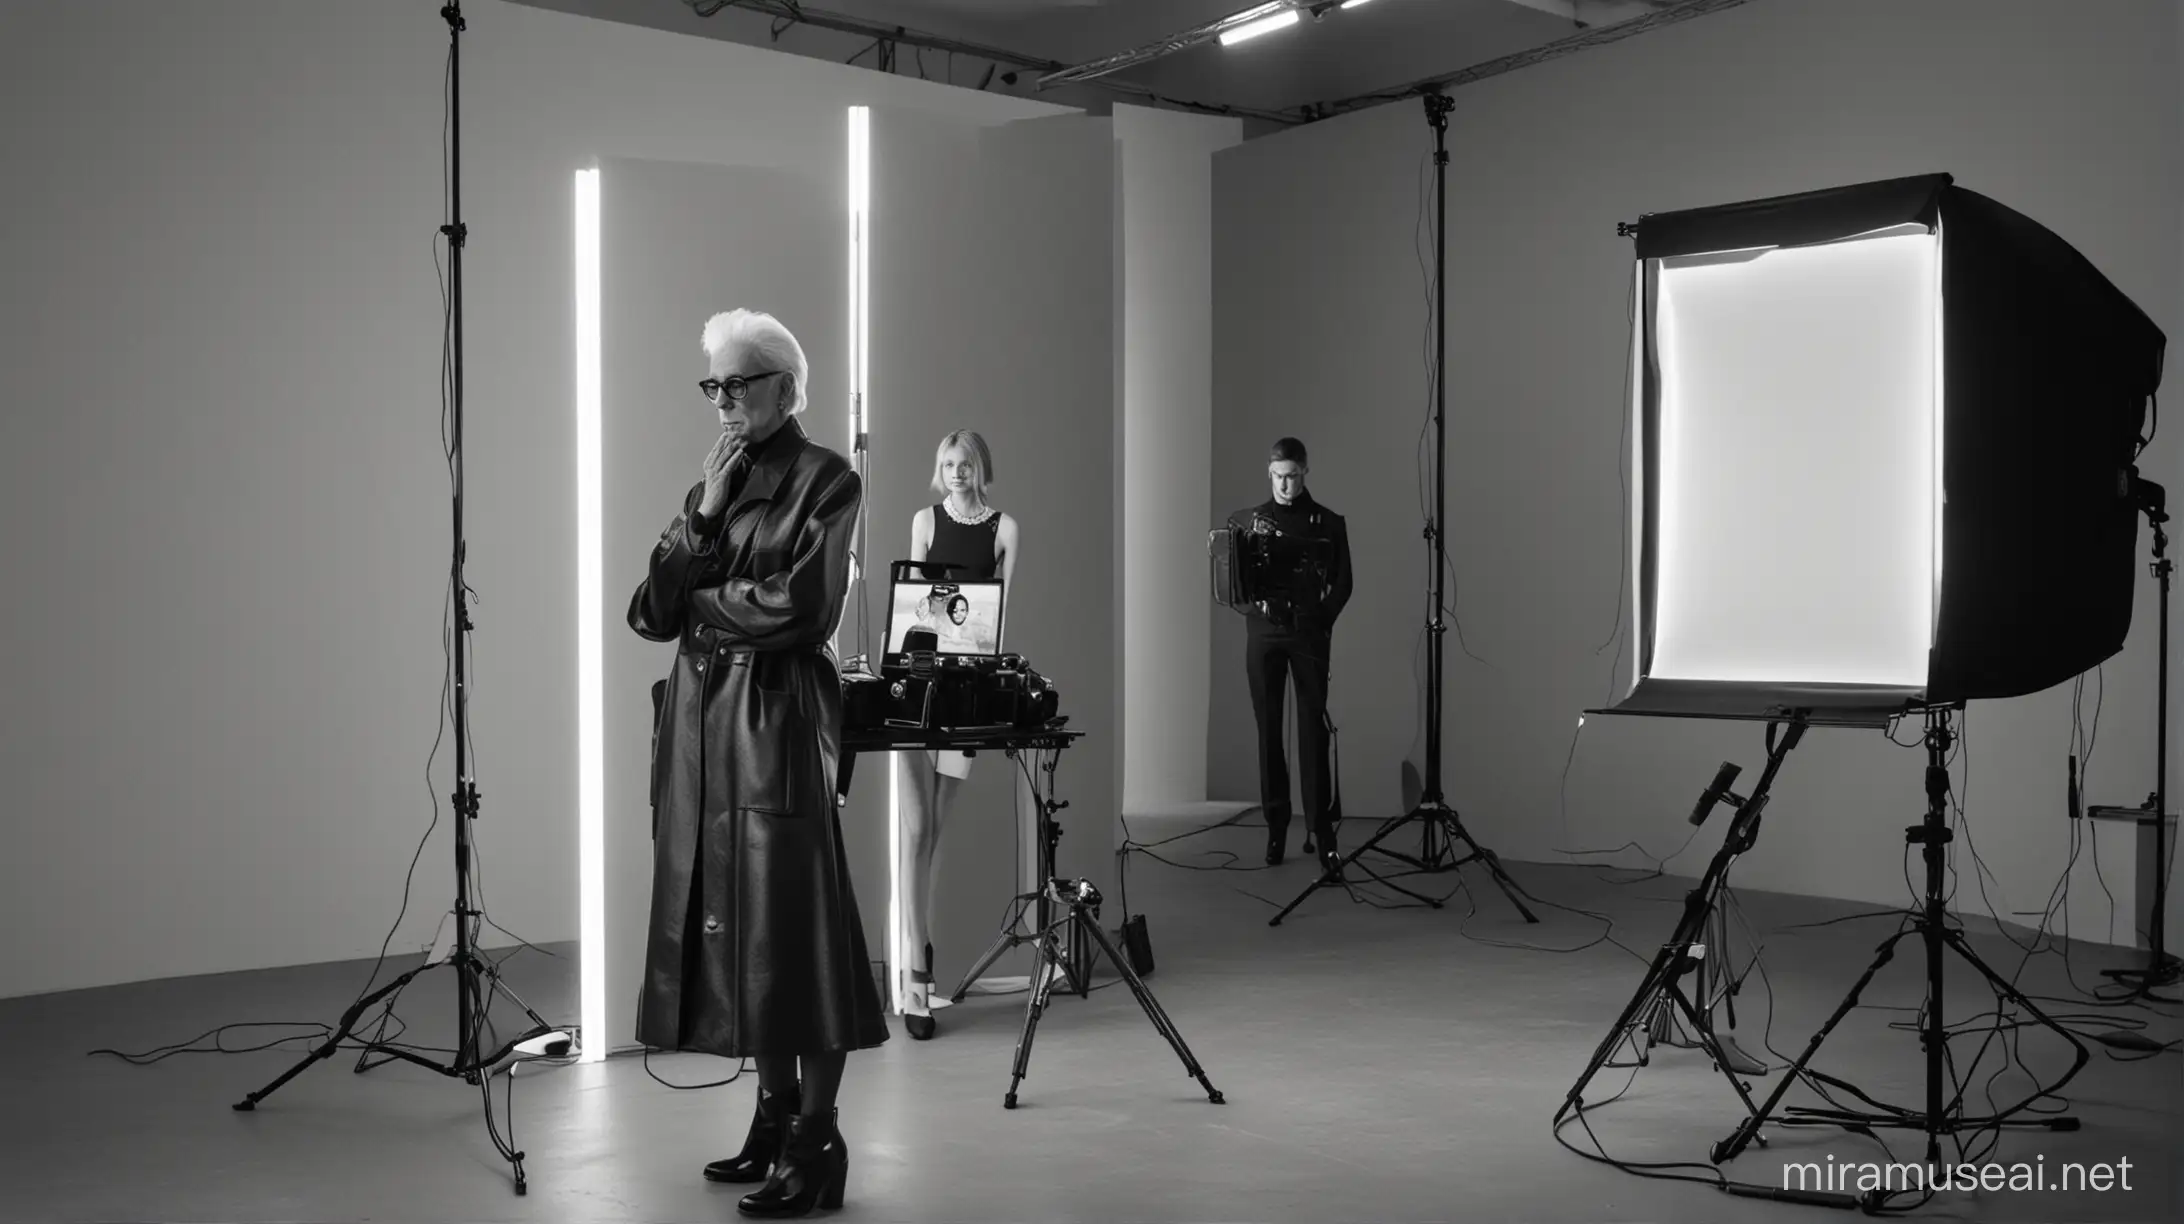 Backstage of a Balenciaga photo shoot which uses the visual codes of the brand.
It’s a 70-year-old model who is being photographed.